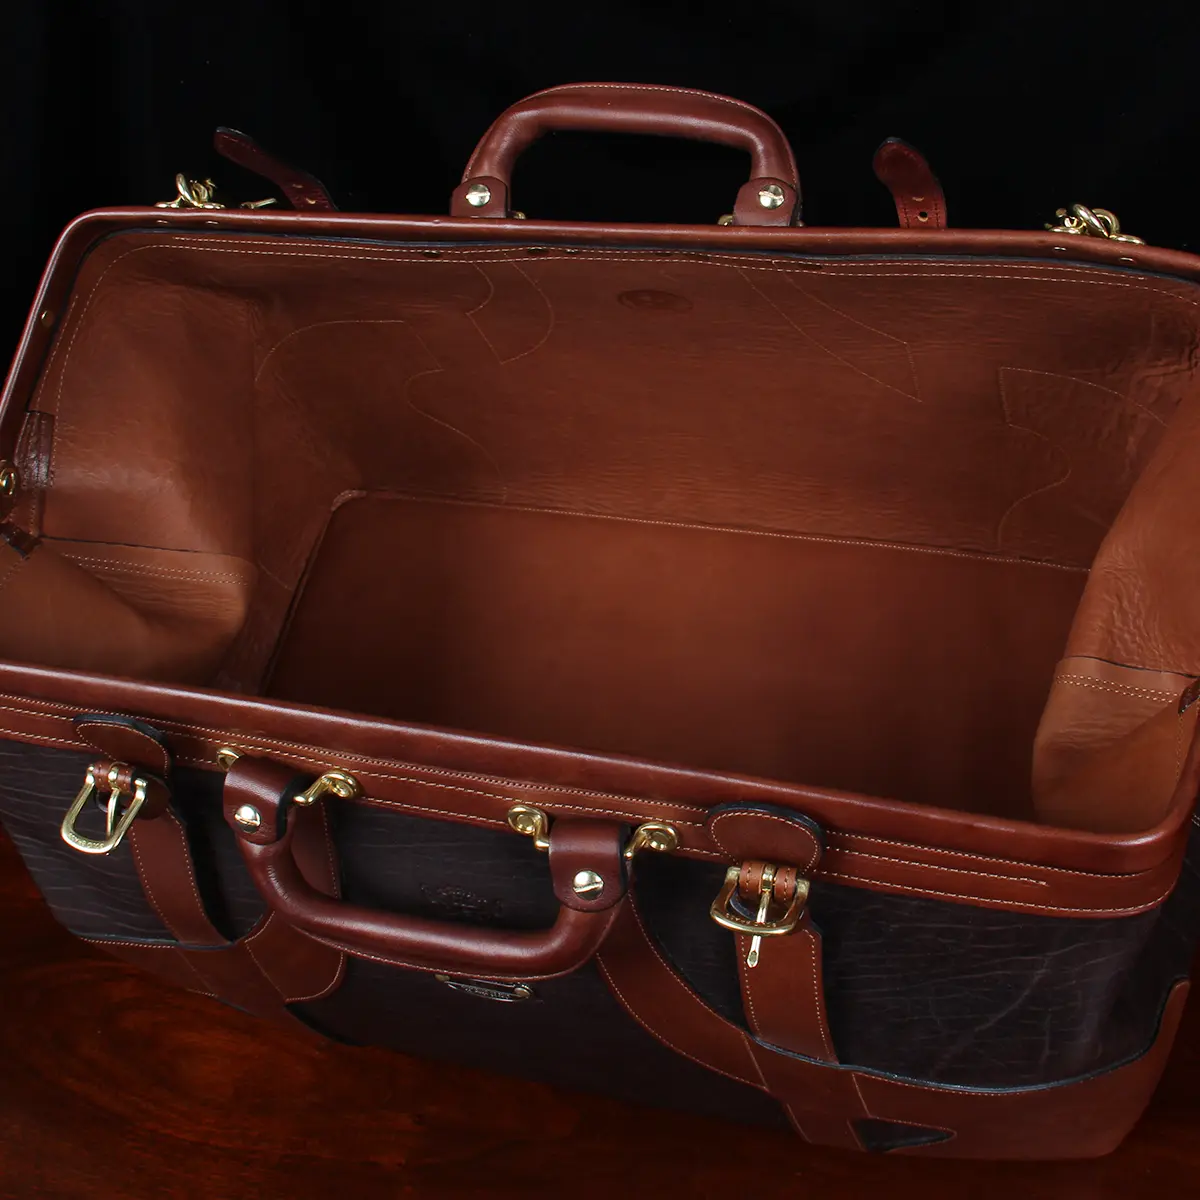 COLLECTING LOUIS VUITTON - PART 10 - Hardcase Suitcases Luggage